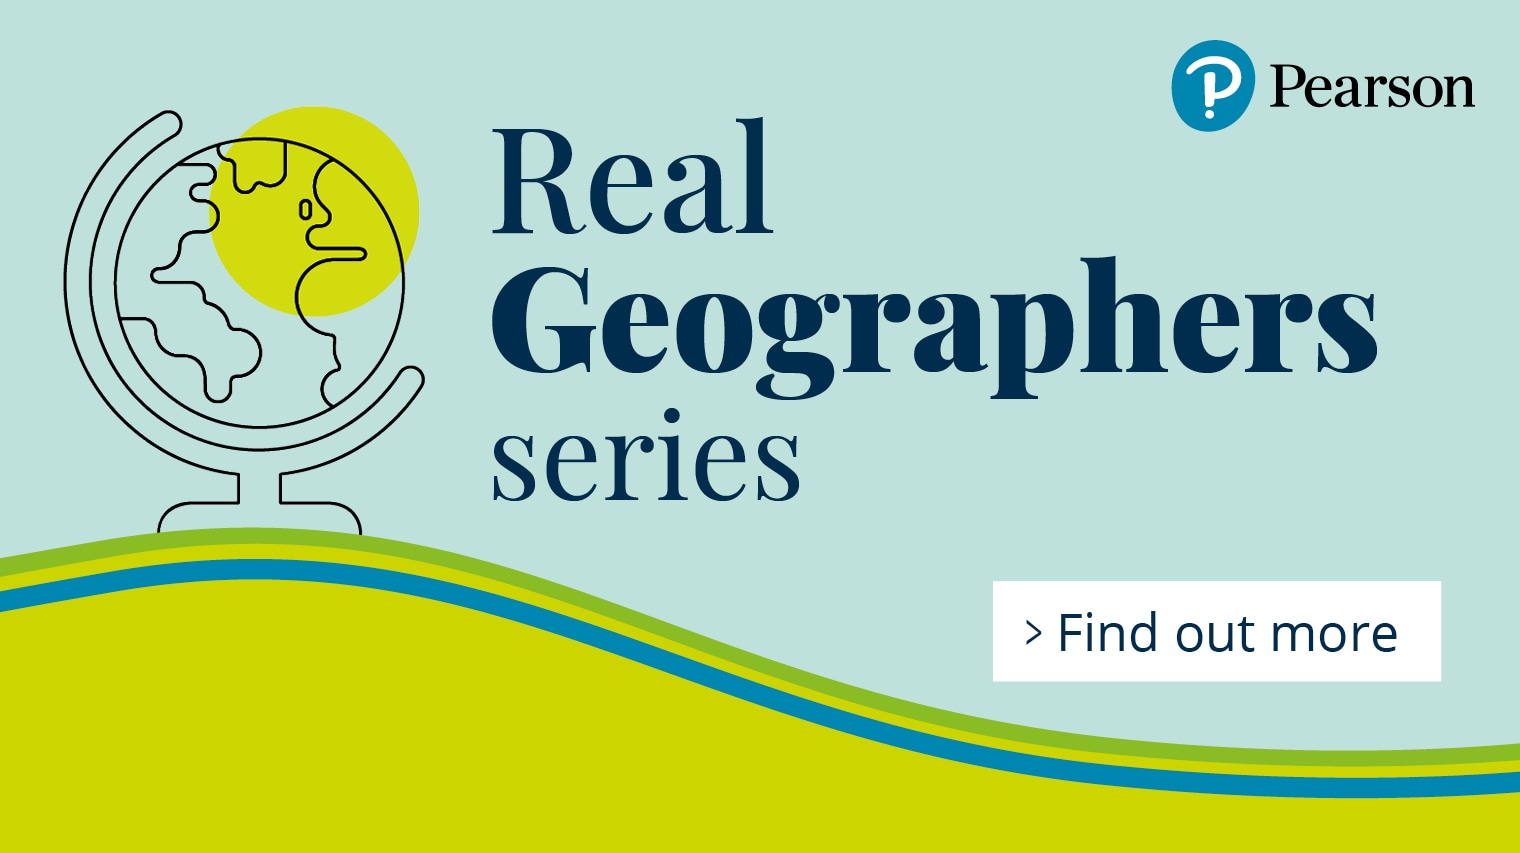 Real Geographers series. Find out more. 